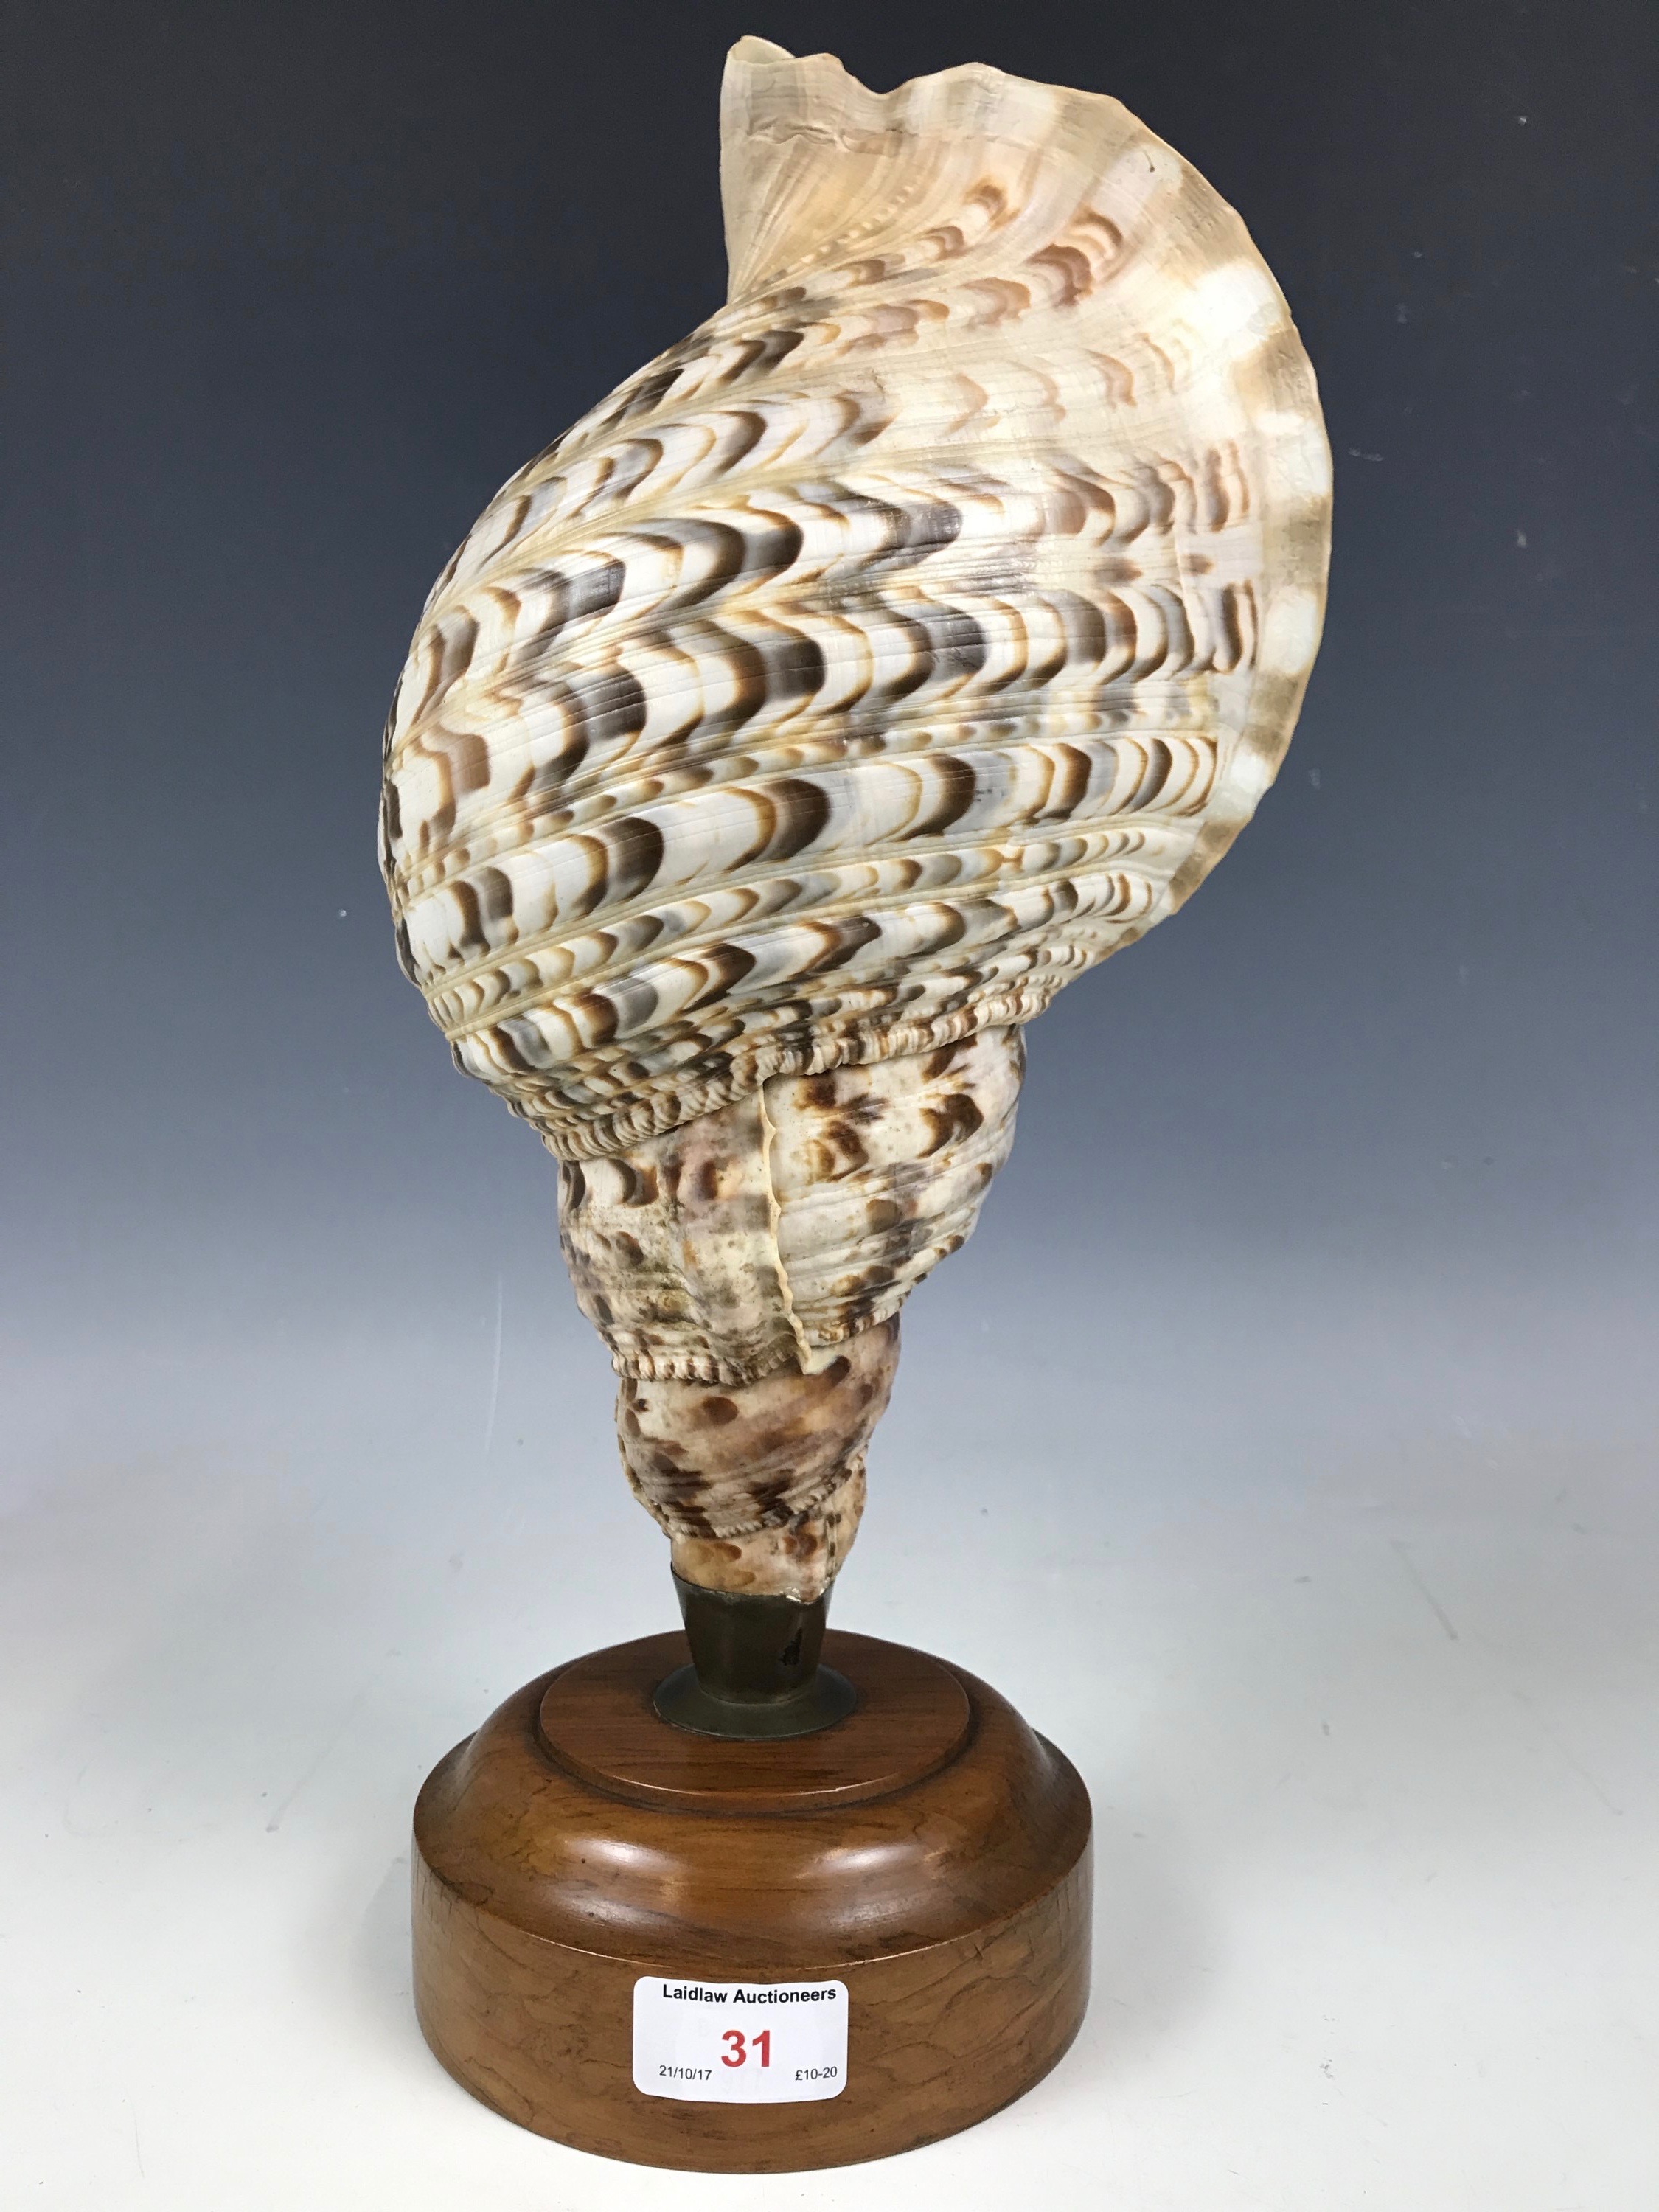 A vintage conch shell lamp base